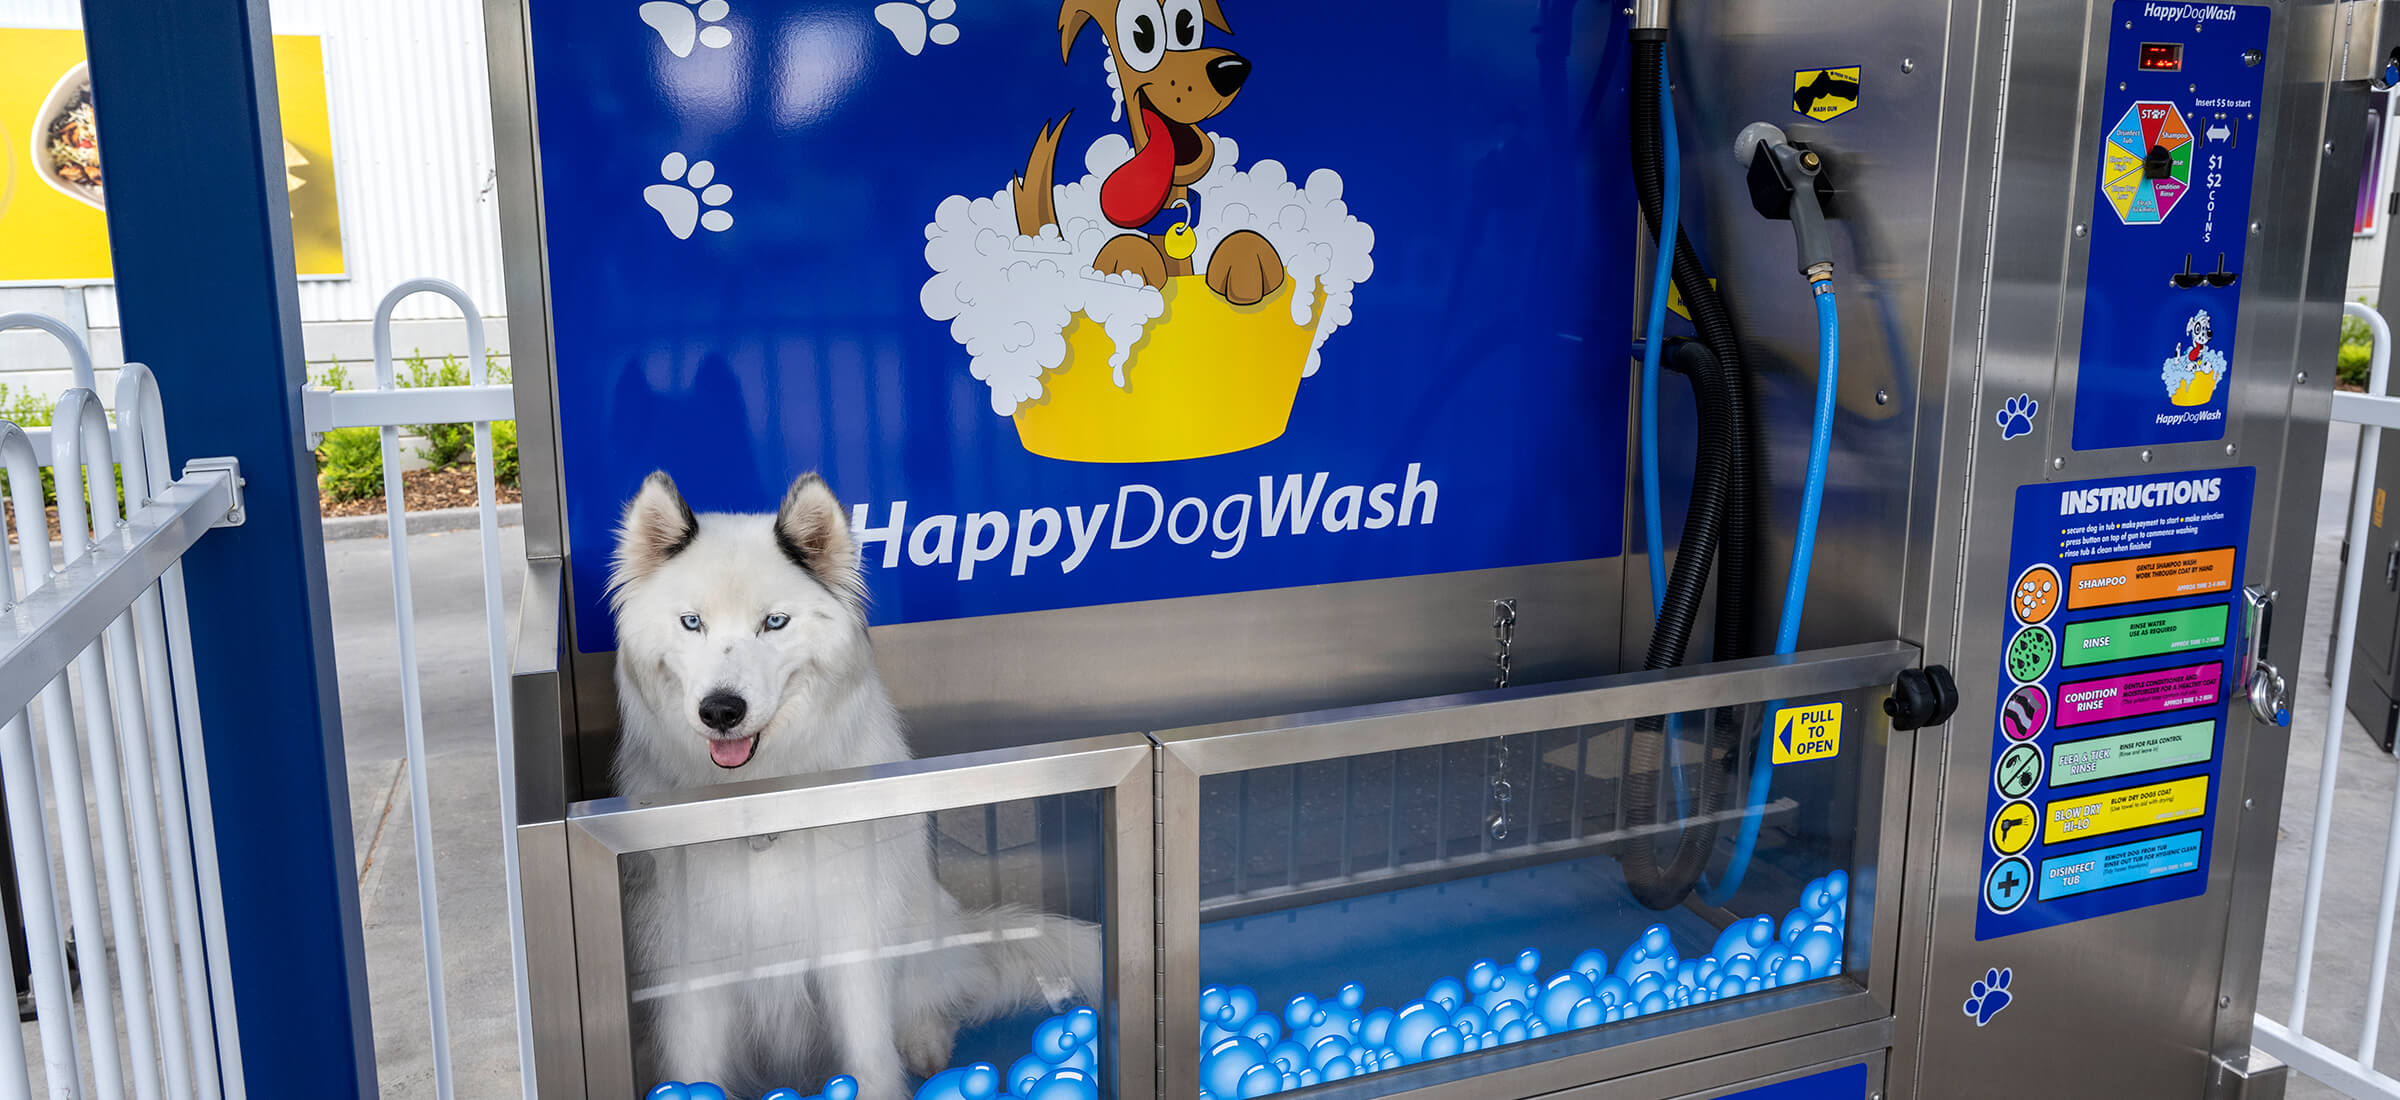 HappyDogWash - no more mess at home, no bathtub disasters and no need to leave your pooch all day at the doggy parlour